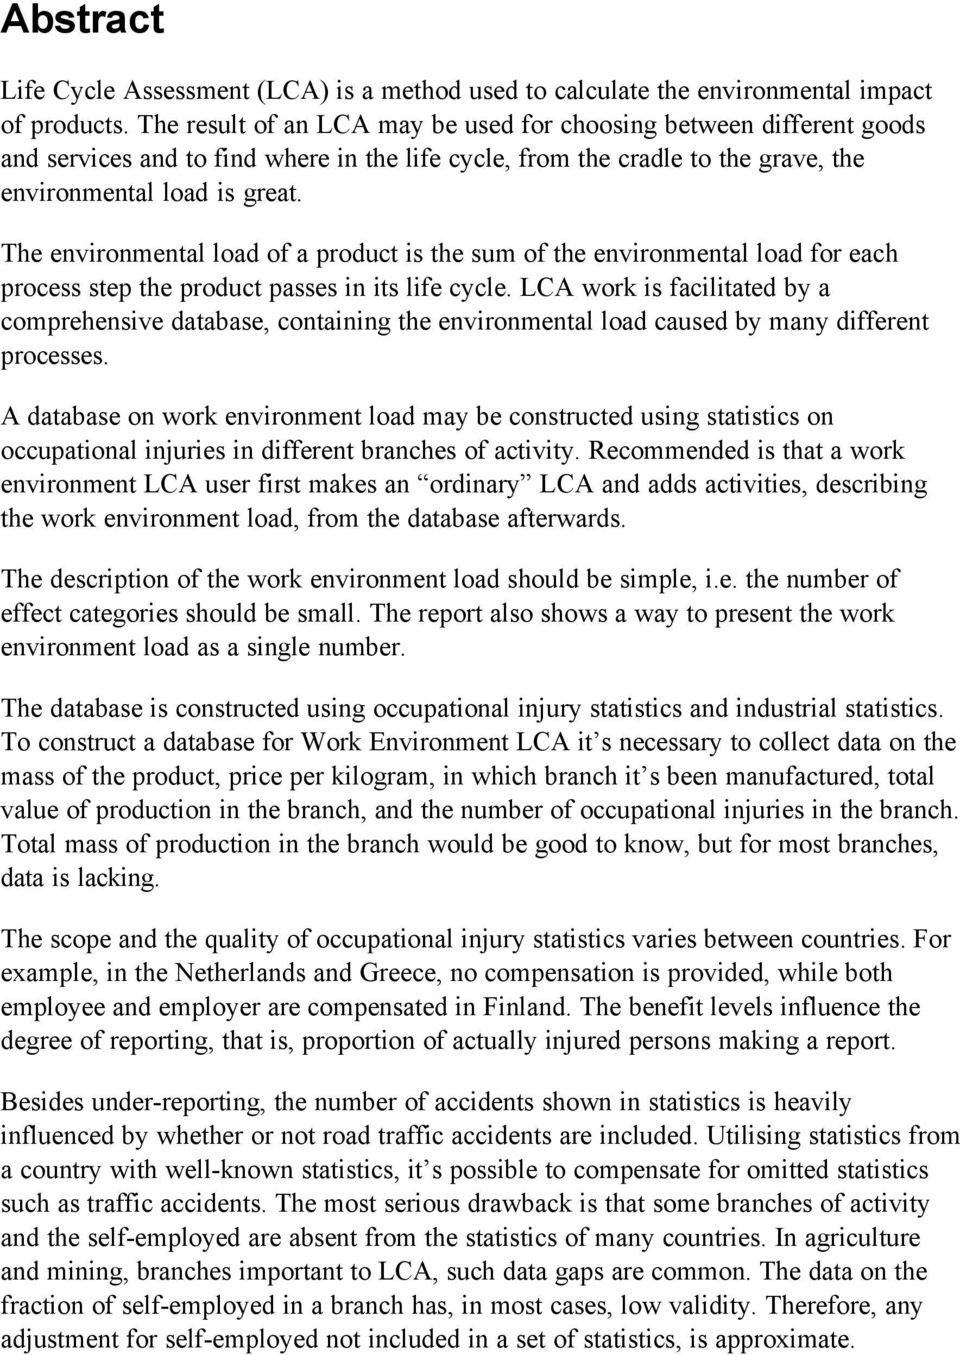 The environmental load of a product is the sum of the environmental load for each process step the product passes in its life cycle.